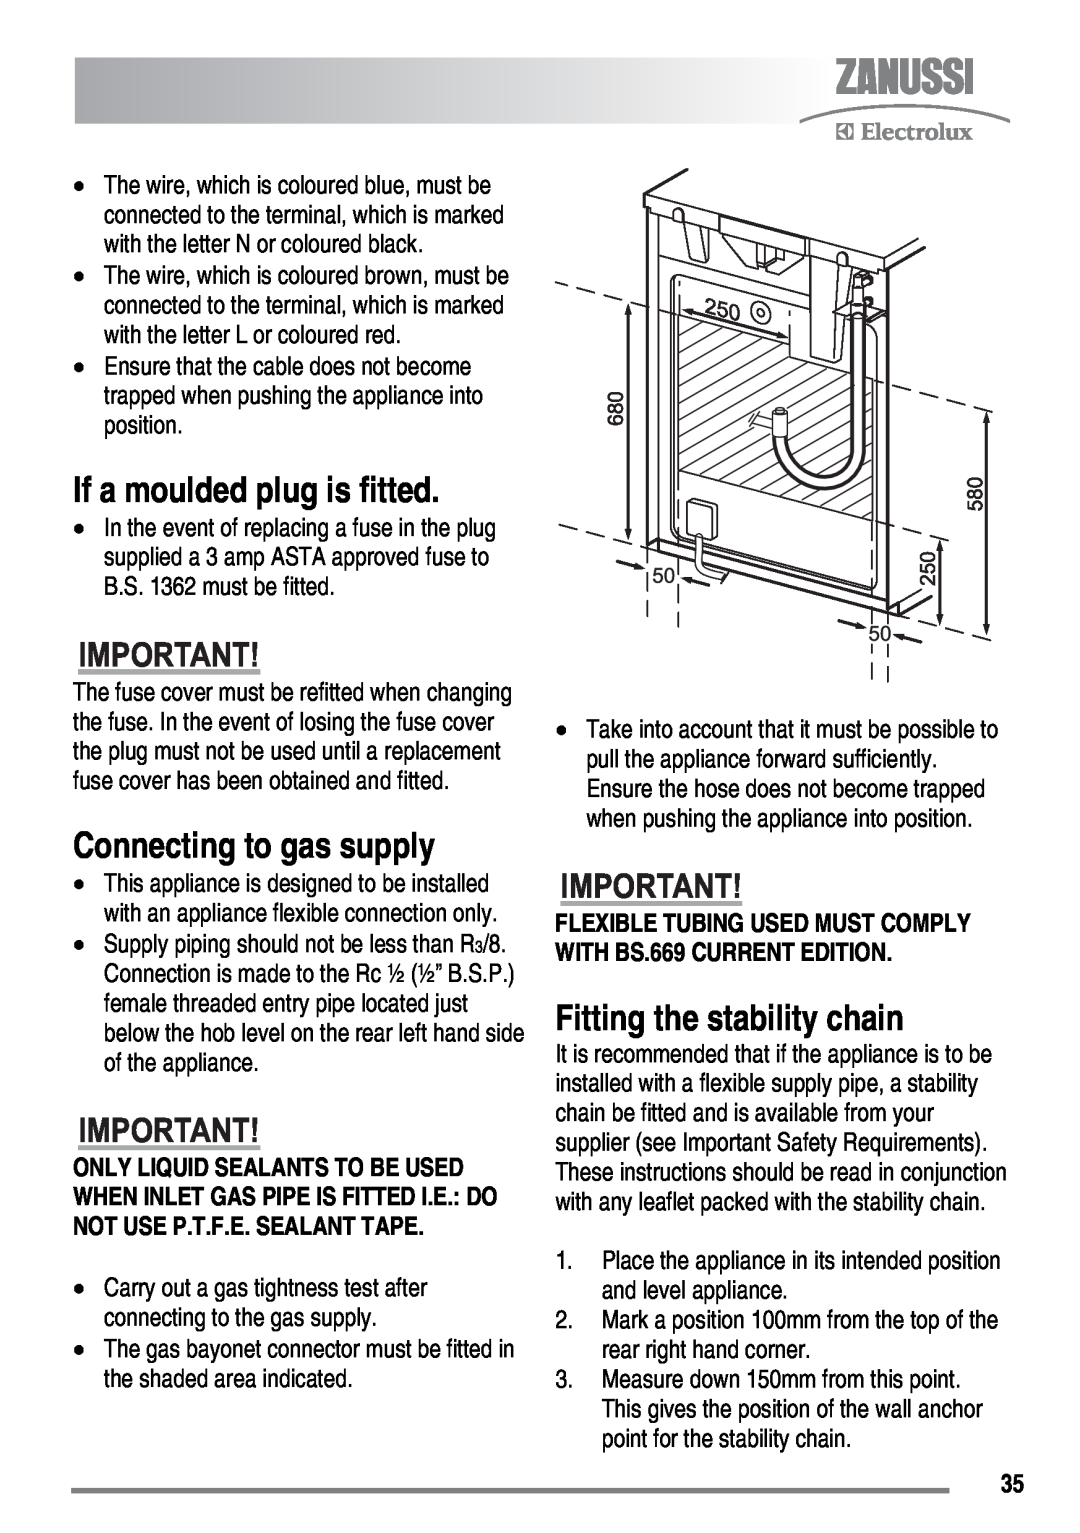 Zanussi ZKG6020 user manual If a moulded plug is fitted, Connecting to gas supply, Fitting the stability chain 